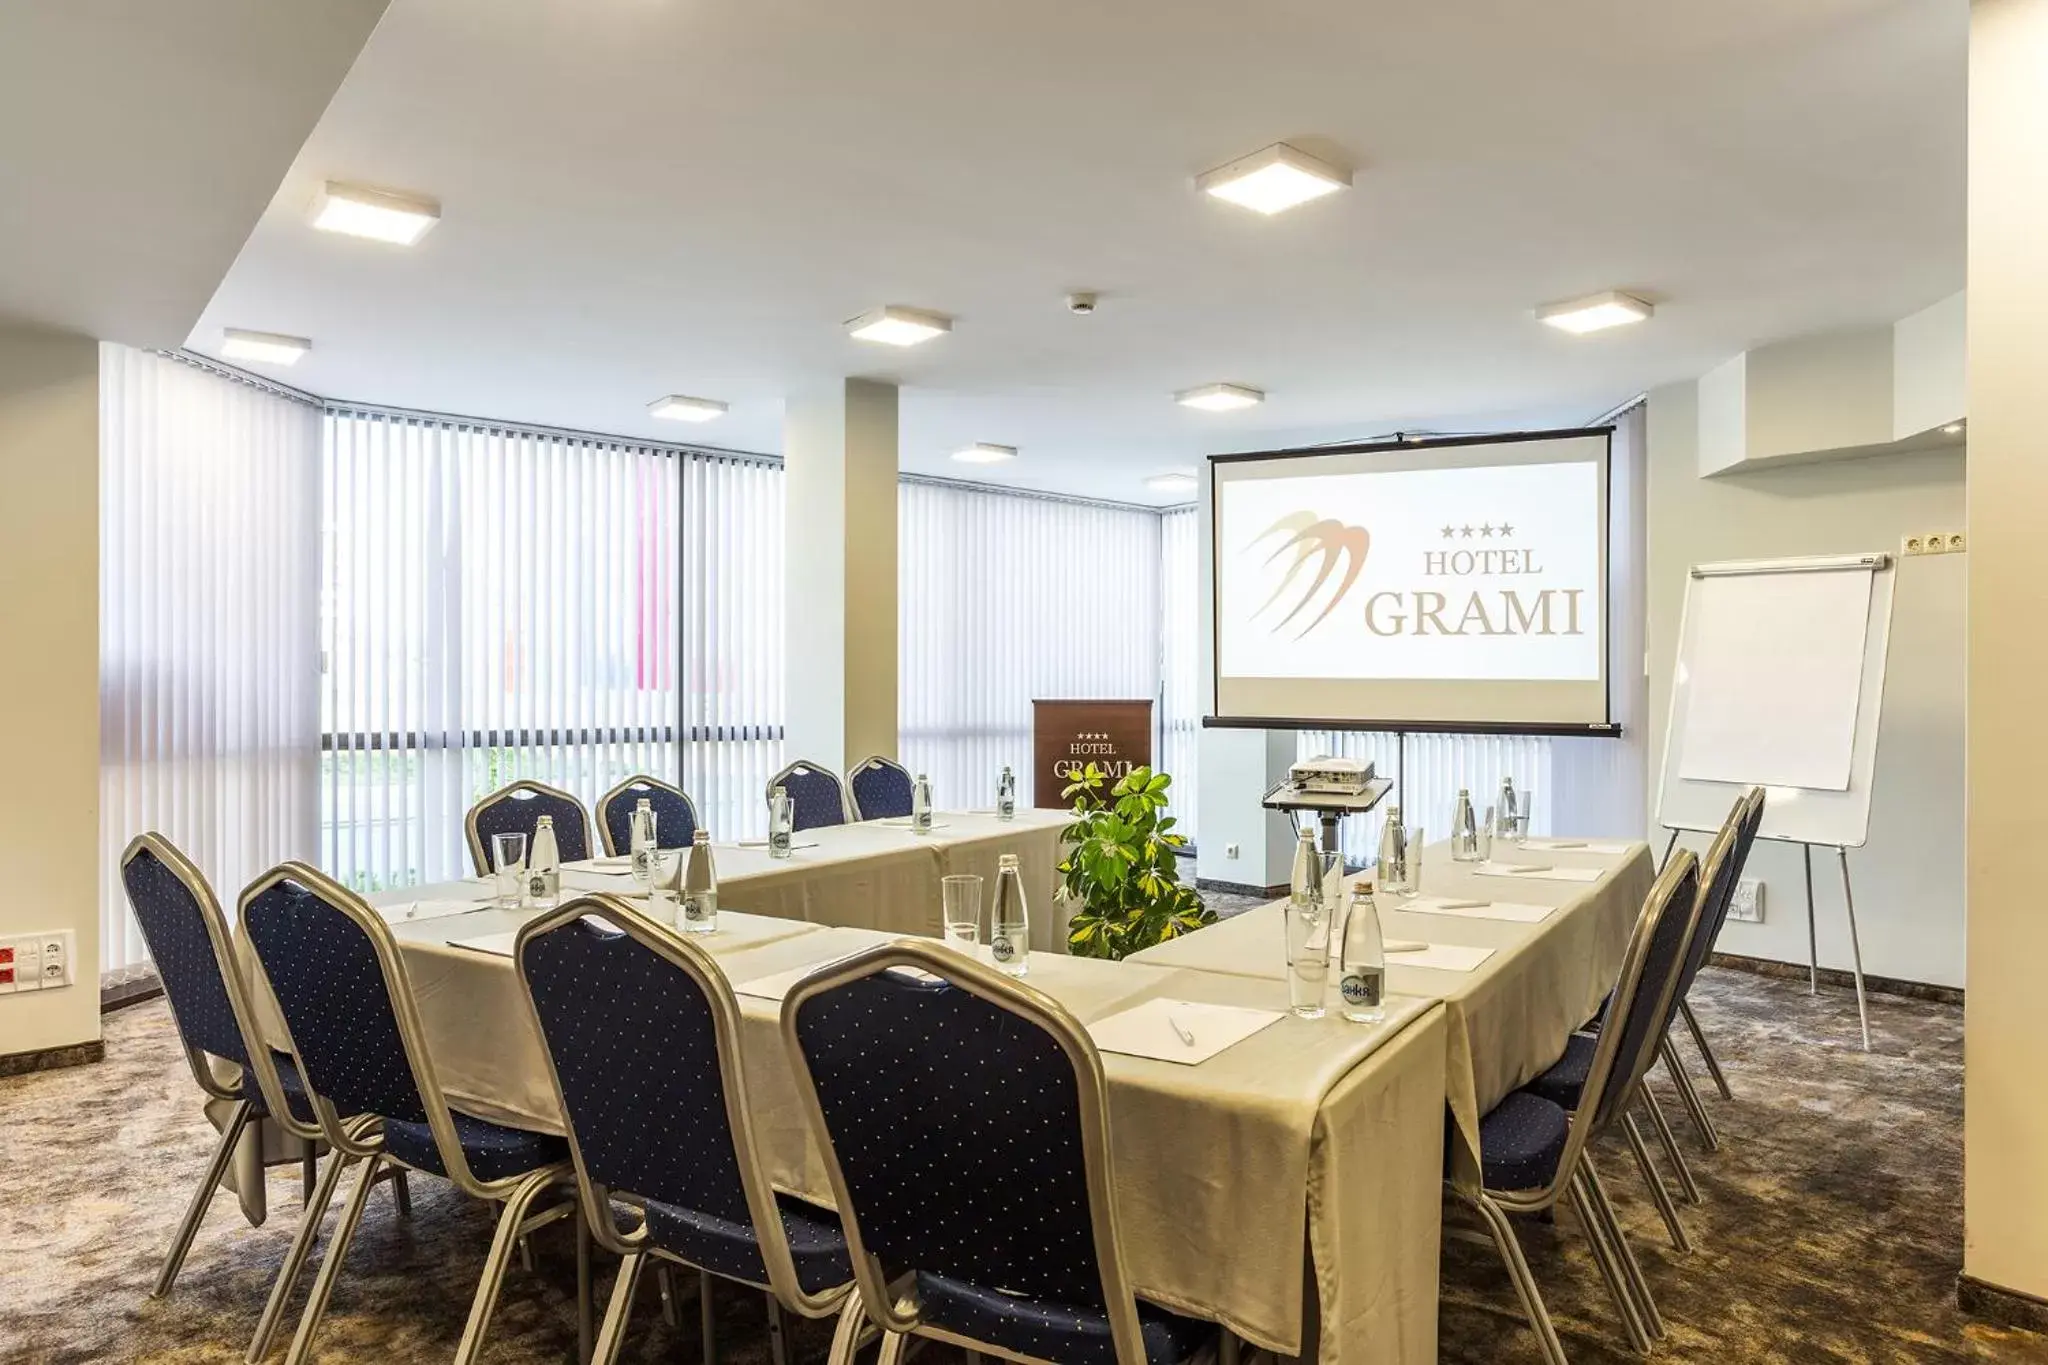 Meeting/conference room in Grami Hotel Sofia